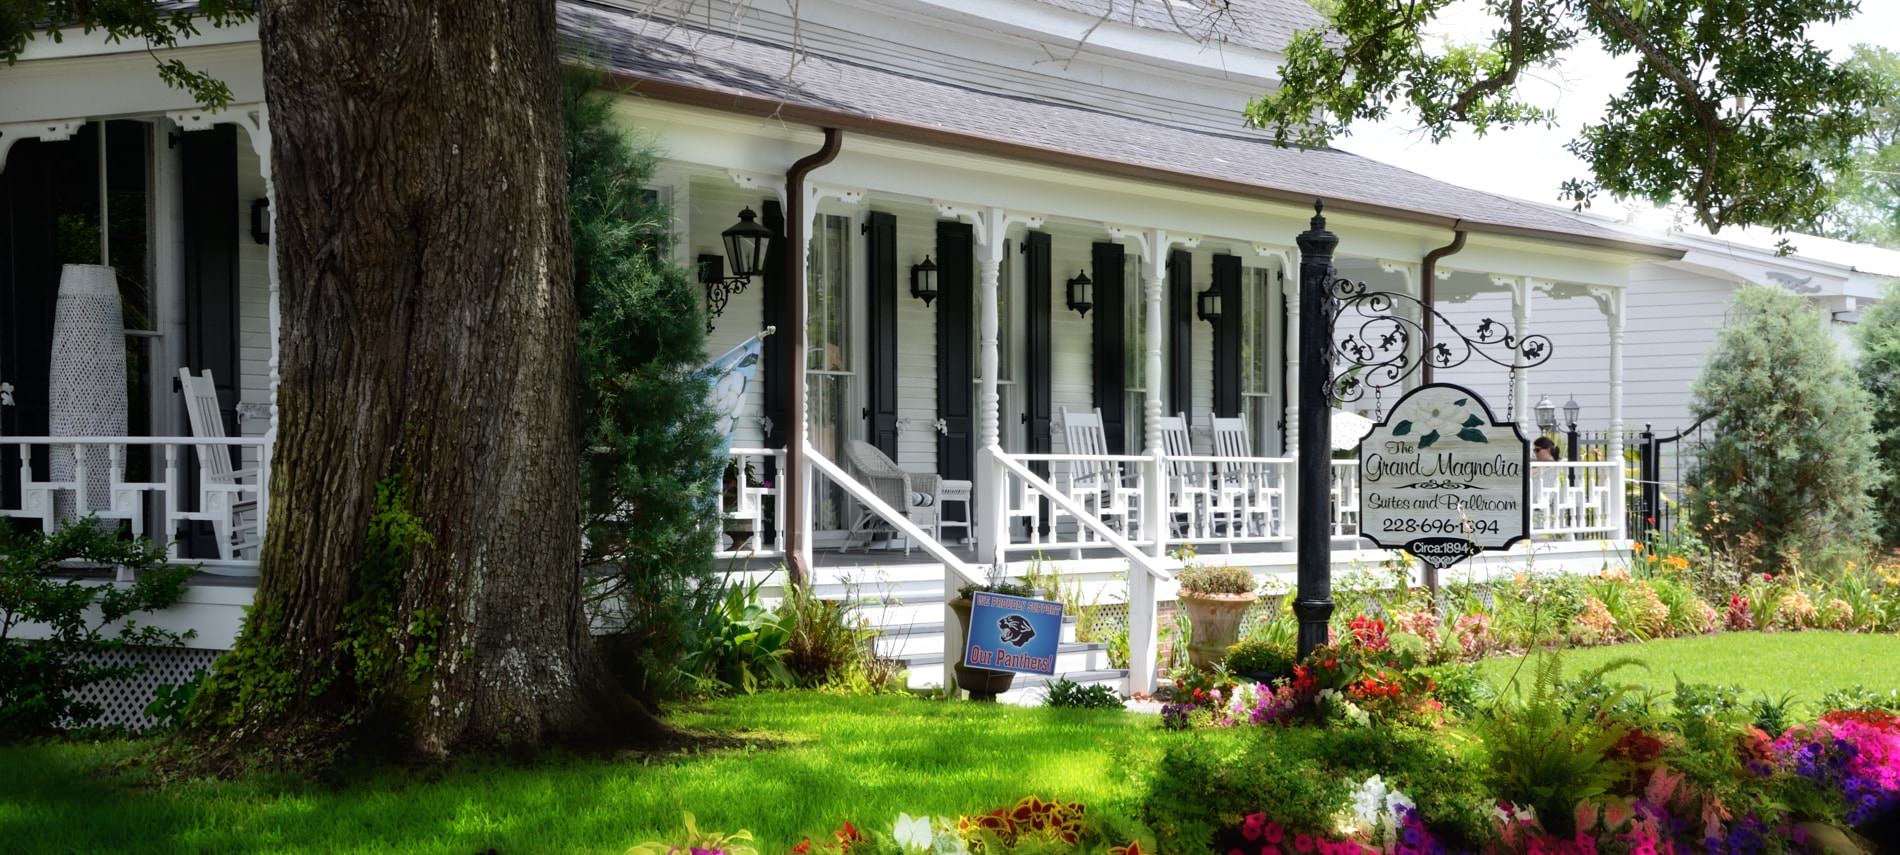 Exterior of Grand Magnolia with white siding, black shutters, covered porch, green lawn, mature trees and colorful flowers